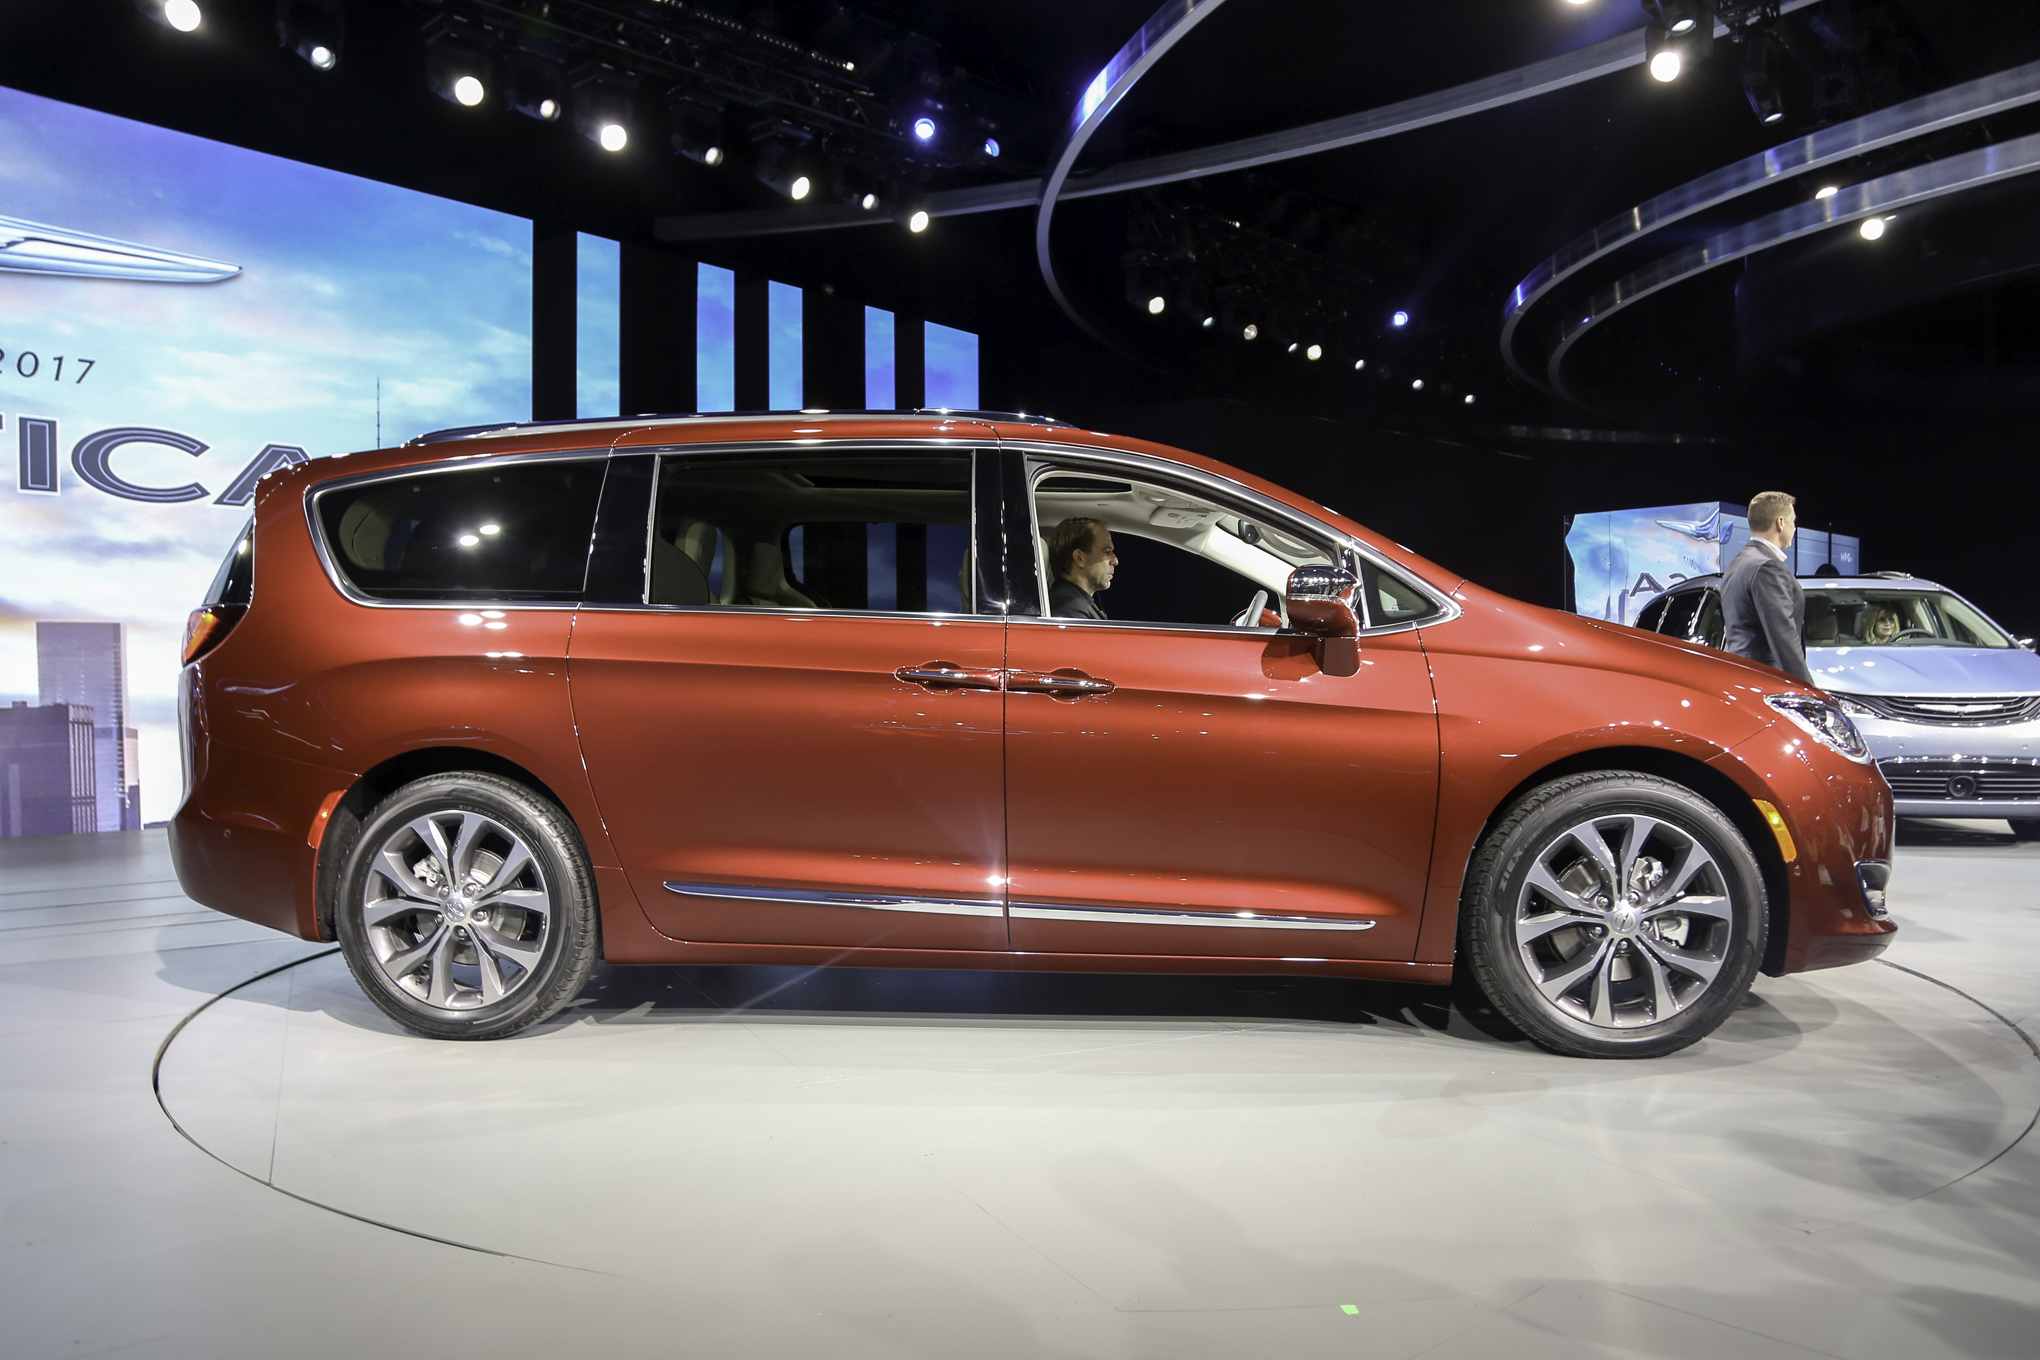 FCA says 2017 Chrysler Pacifica will cost $29,590 and up